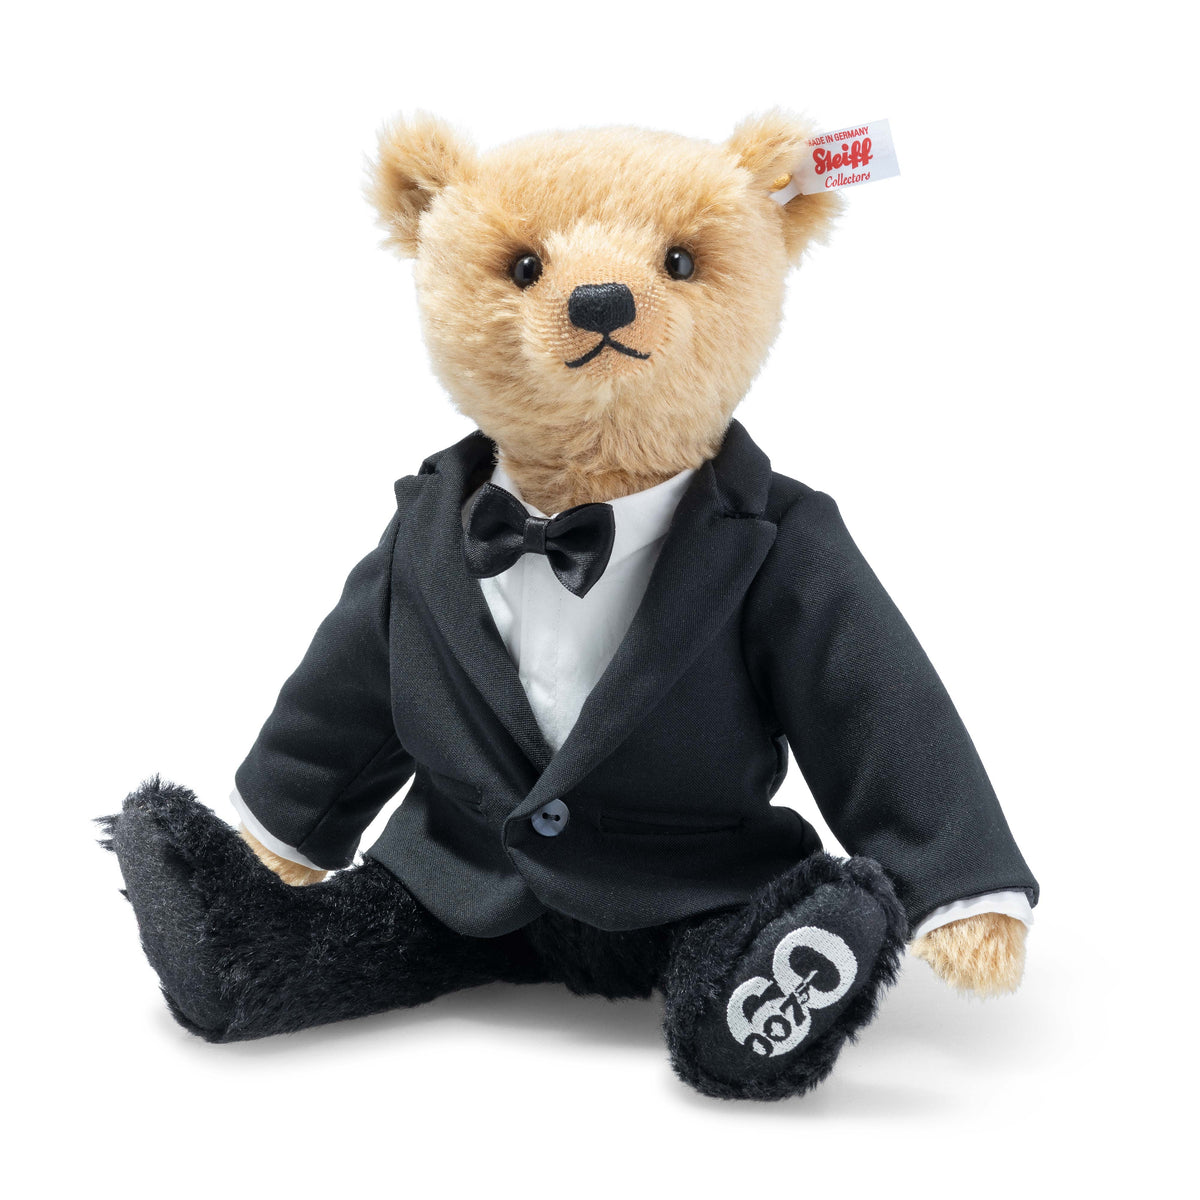 James Bond 60th Anniversary Bear - Numbered Edition - By Steiff (Pre-order) TEDDY BEAR 007Store 